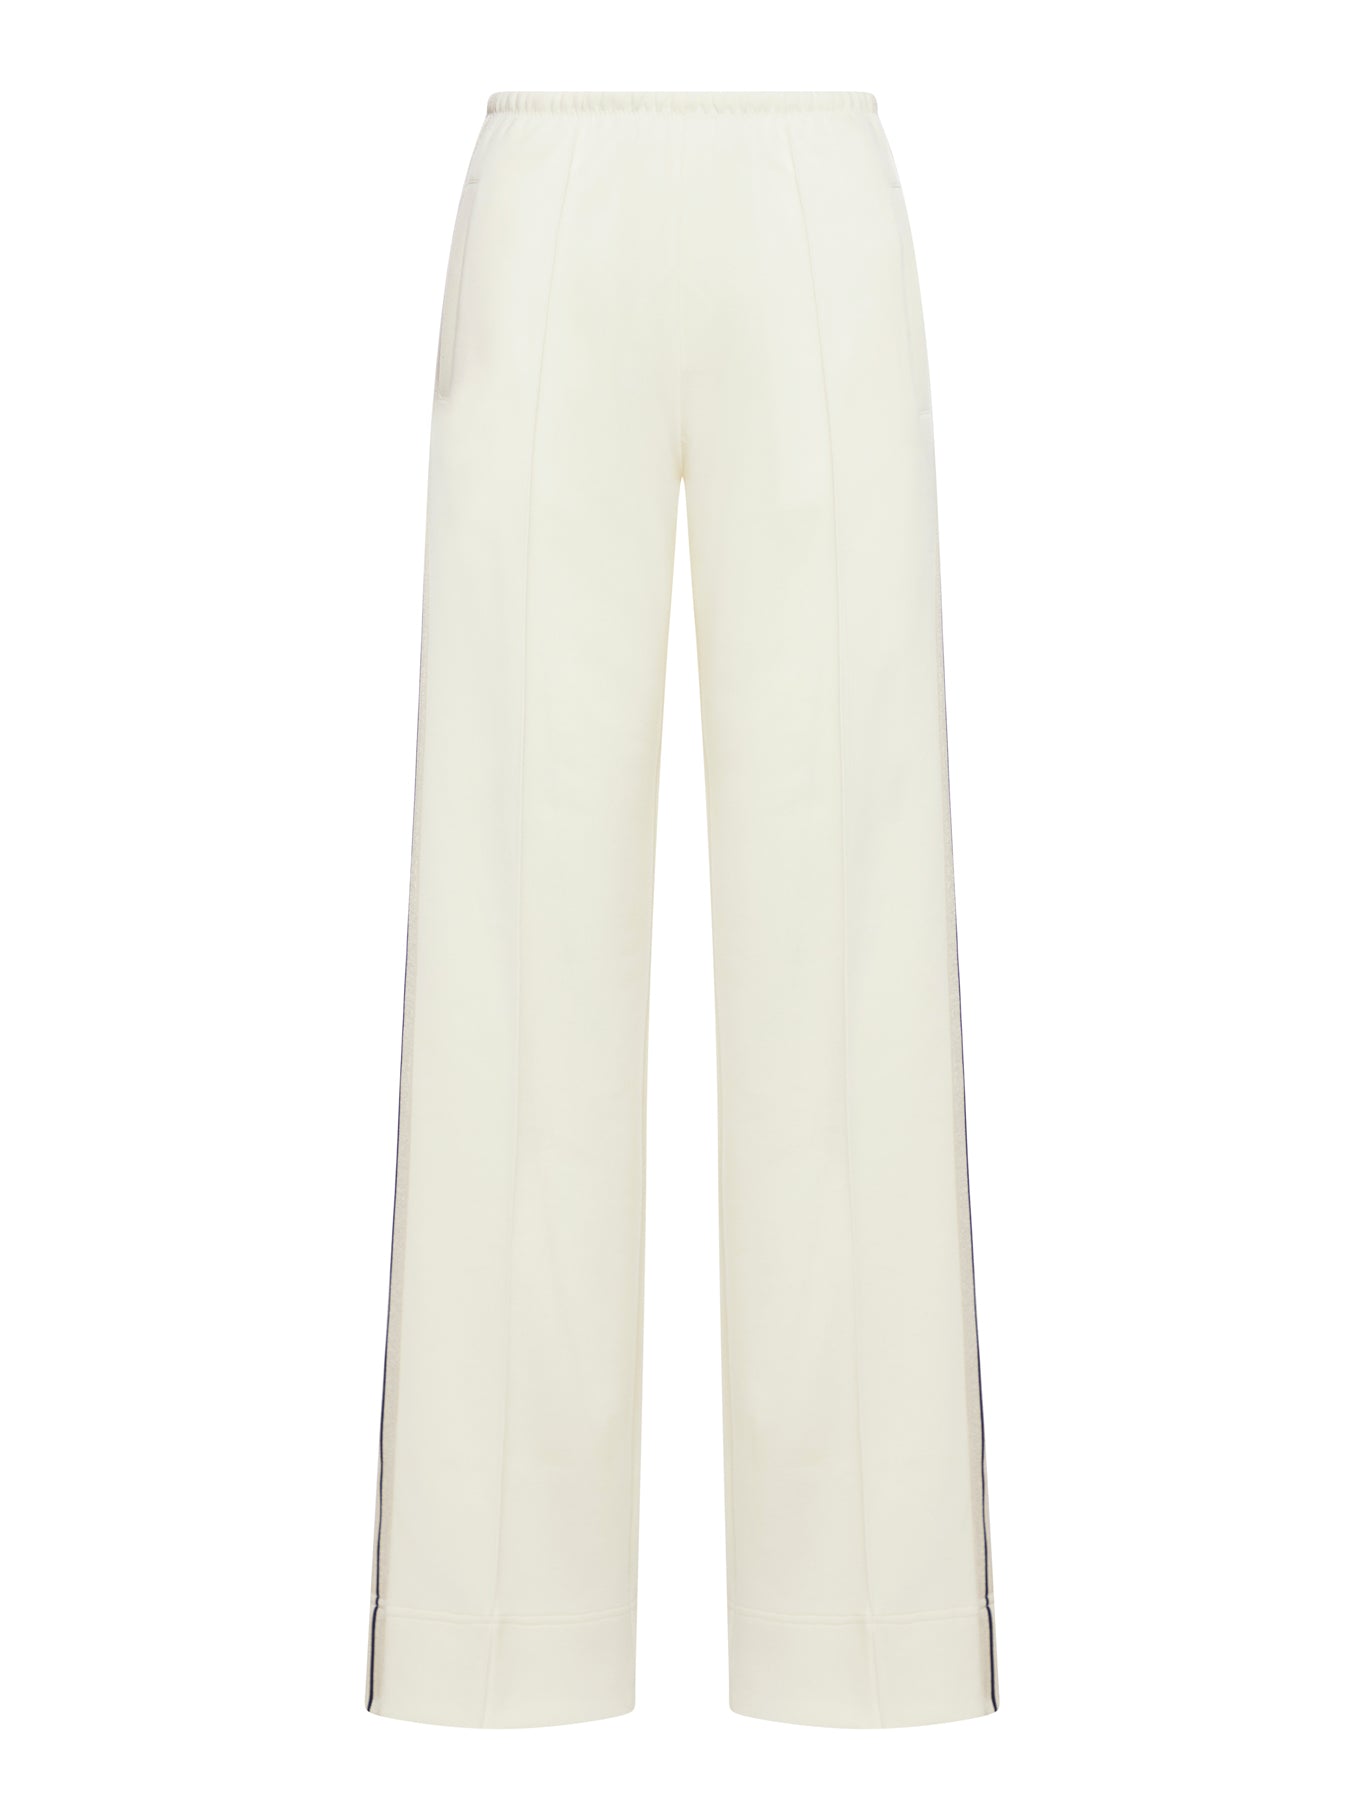 LOOSE SUIT TRACK PANTS BEIGE  OFF WHITE